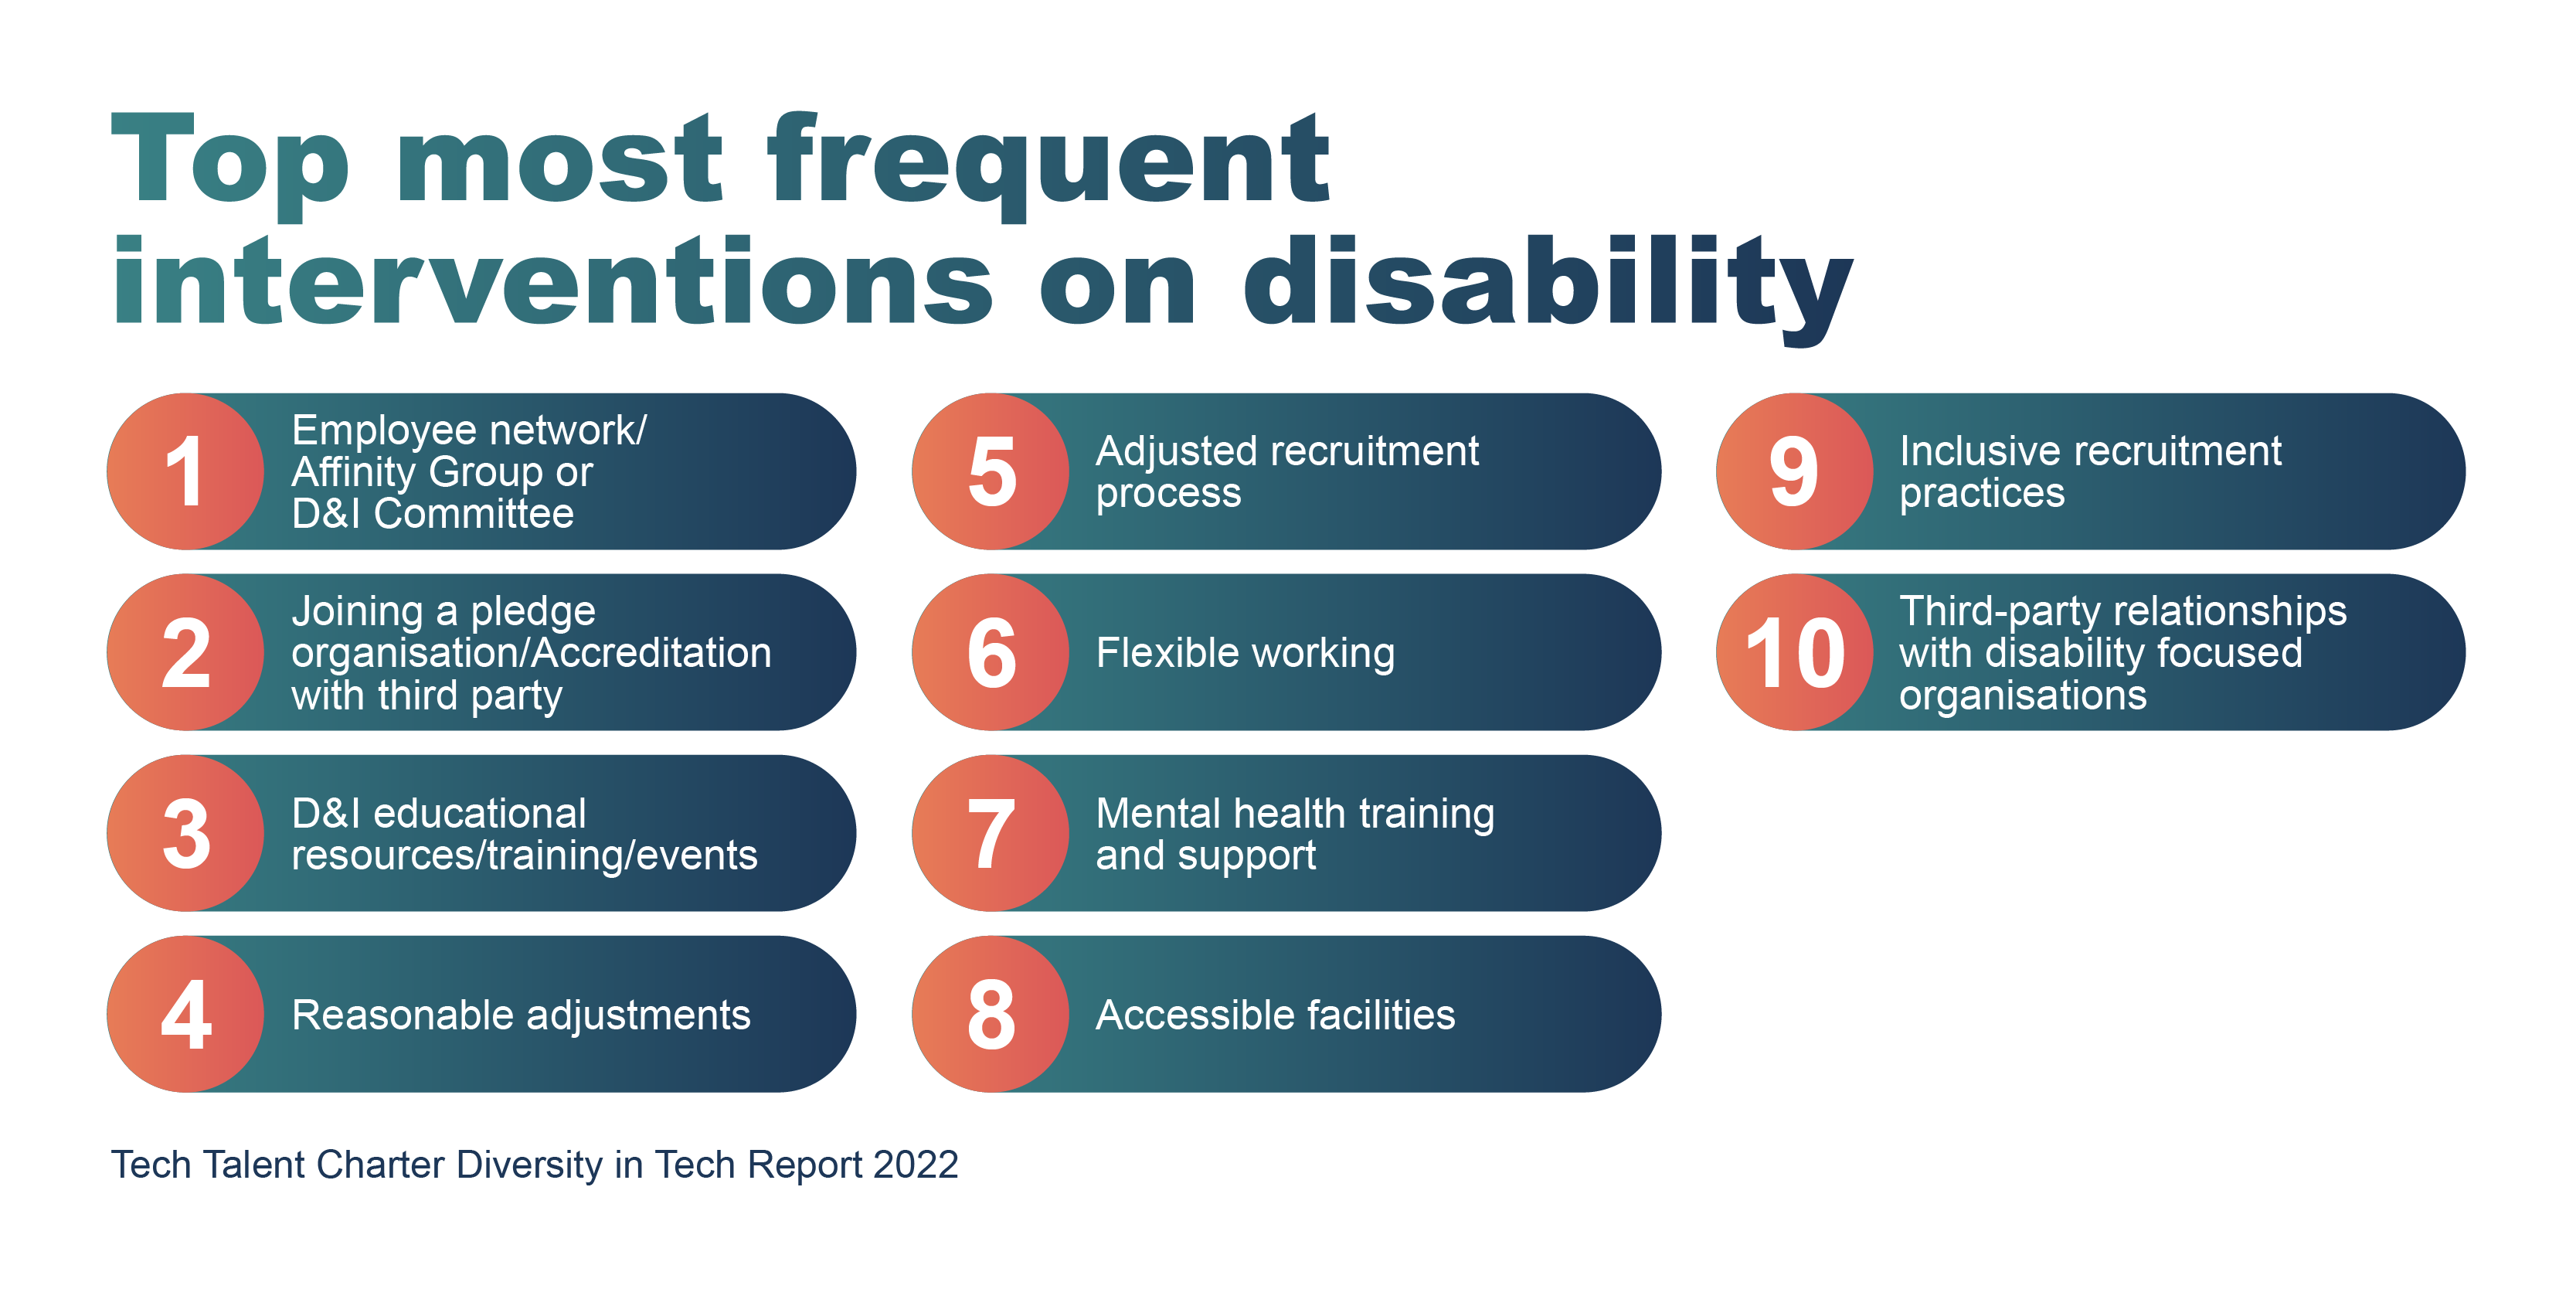 A graphical representation of the top most frequent interventions on disability